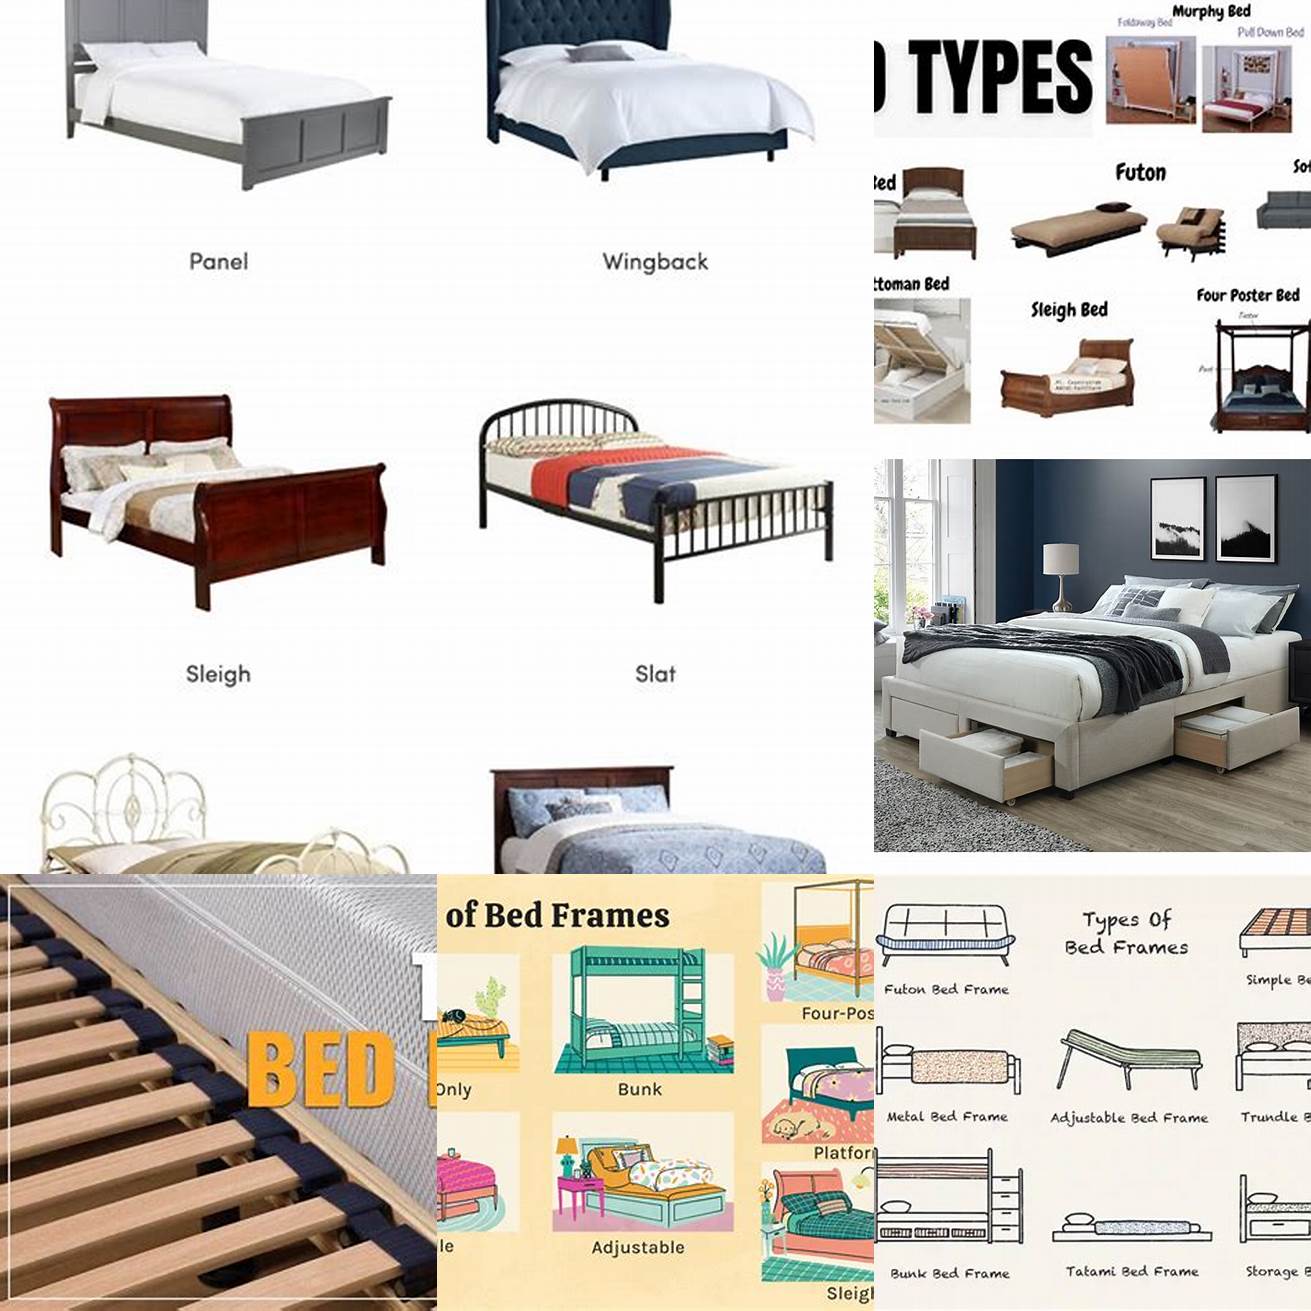 Several types of bed frames available to choose from